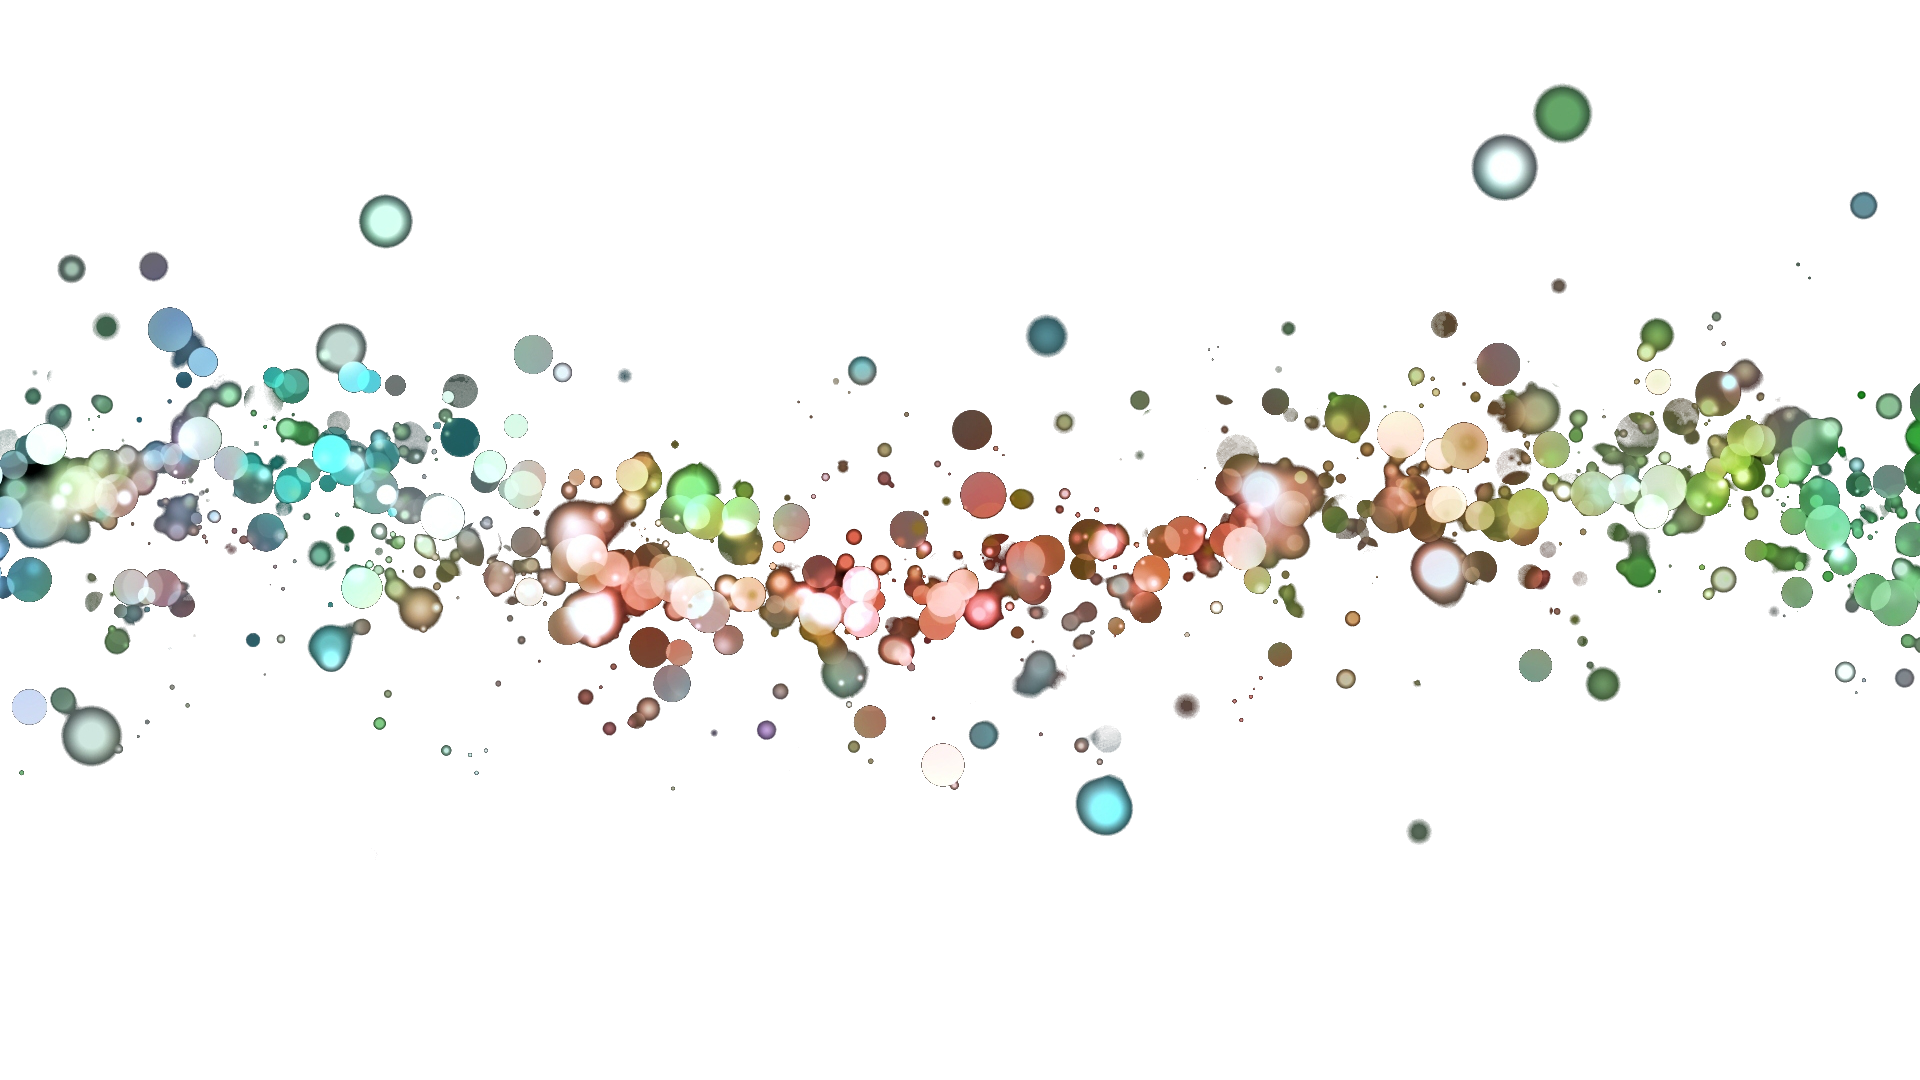 Free Download Bubbles Images Png Transparent Background Free Download 11427 Freeiconspng